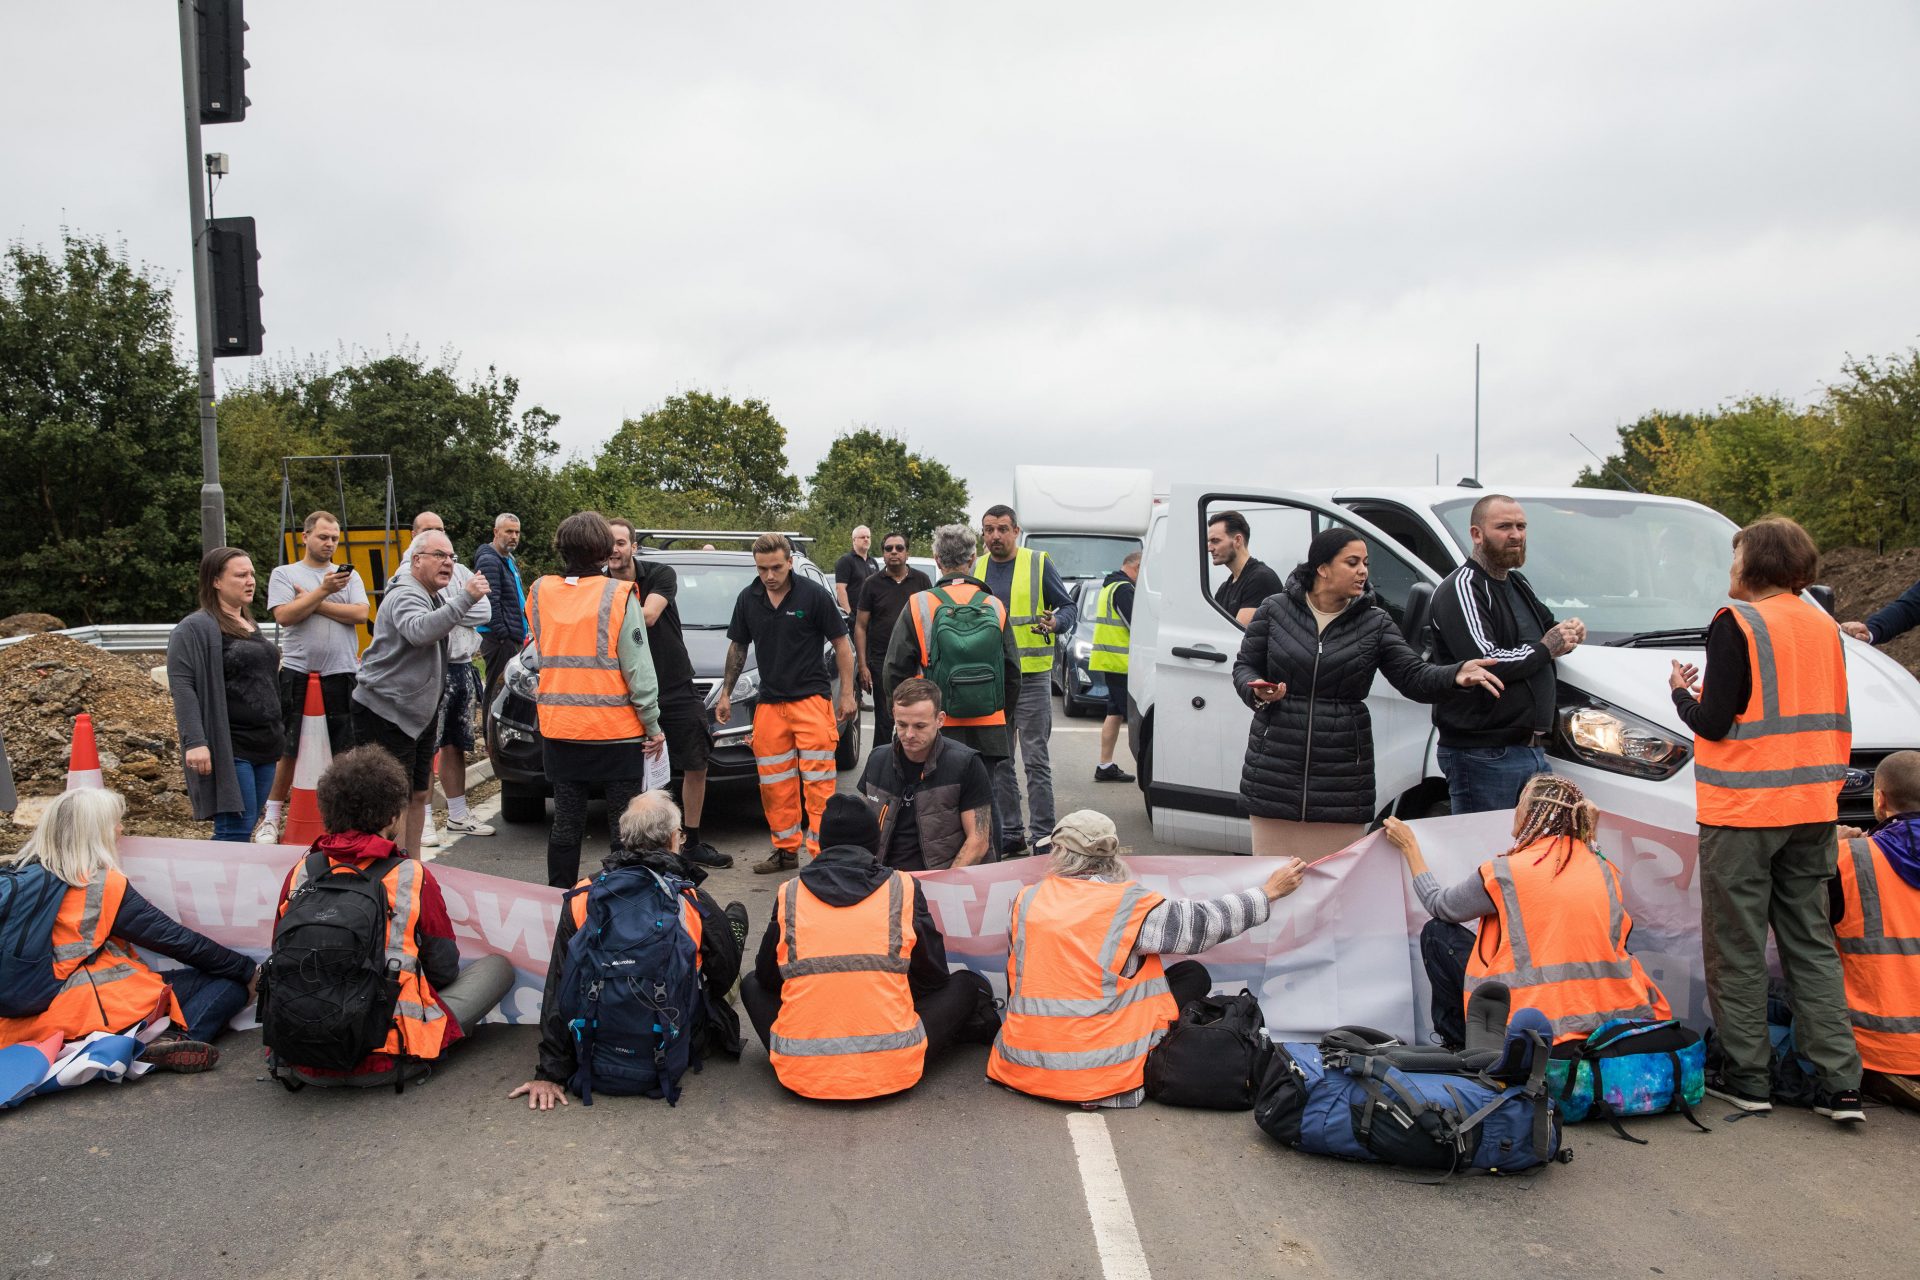 Angry motorists confront Insulate Britain protestors blocking a slip road at Junction 25 of the M25, near Enfield. Photo: Mark Kerrison/In Pictures via Getty Images.